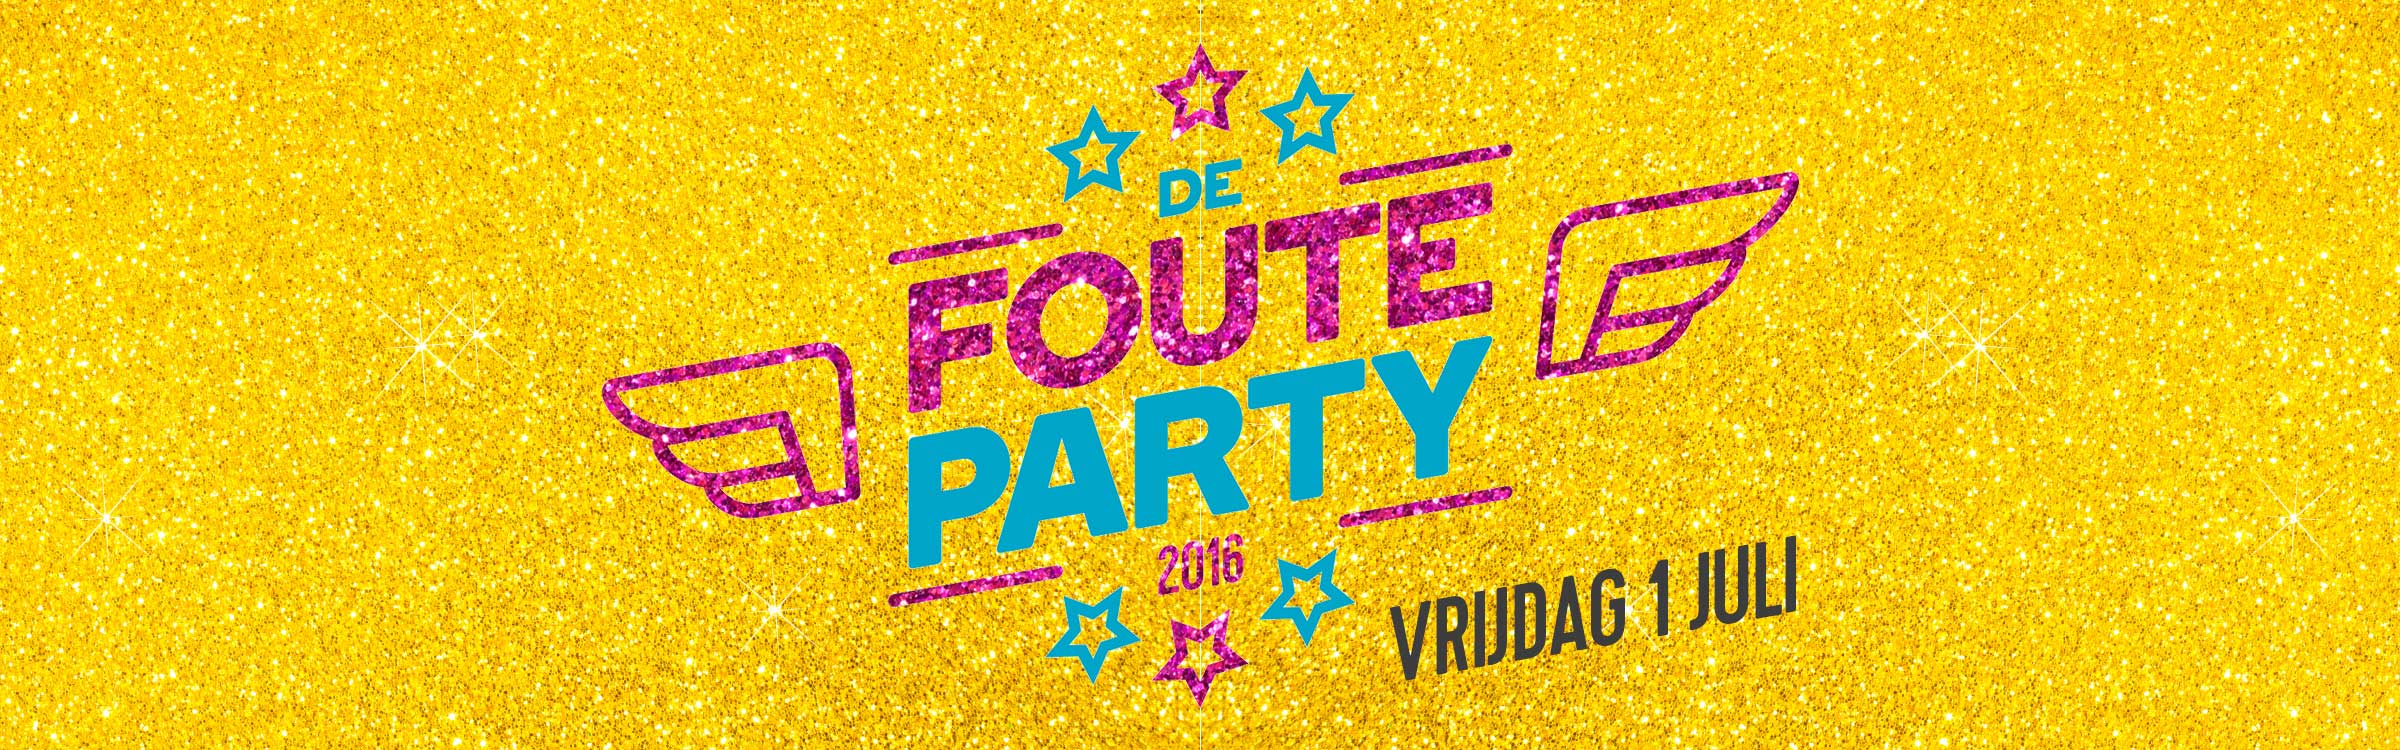 2400x750 q tickets fouteparty